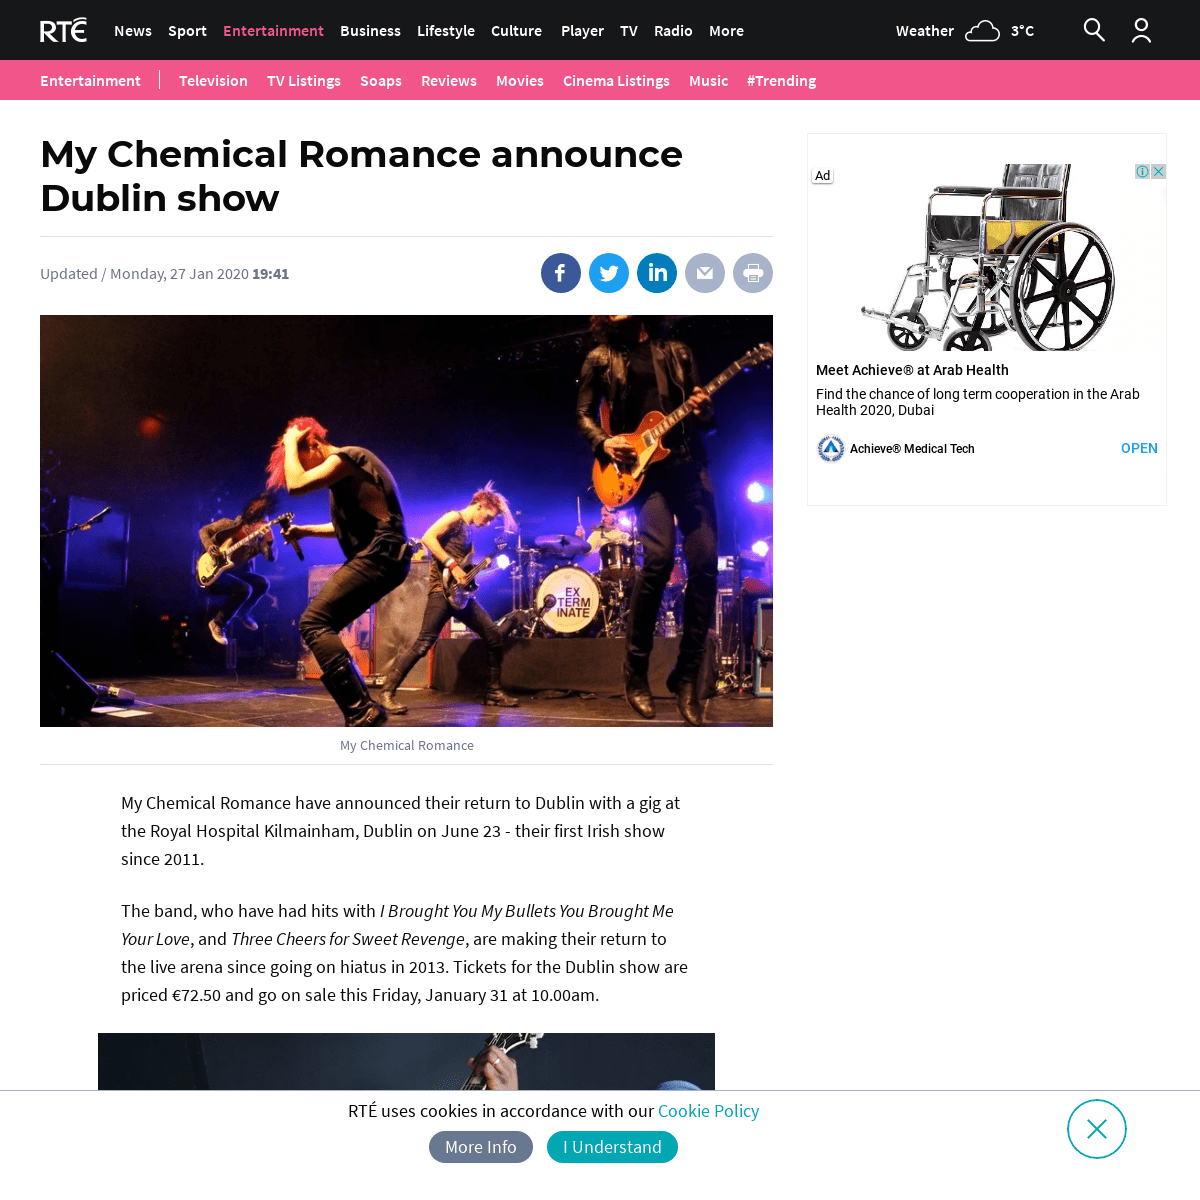 A complete backup of www.rte.ie/entertainment/2020/0127/1111170-my-chemical-romance-announce-dublin-show/